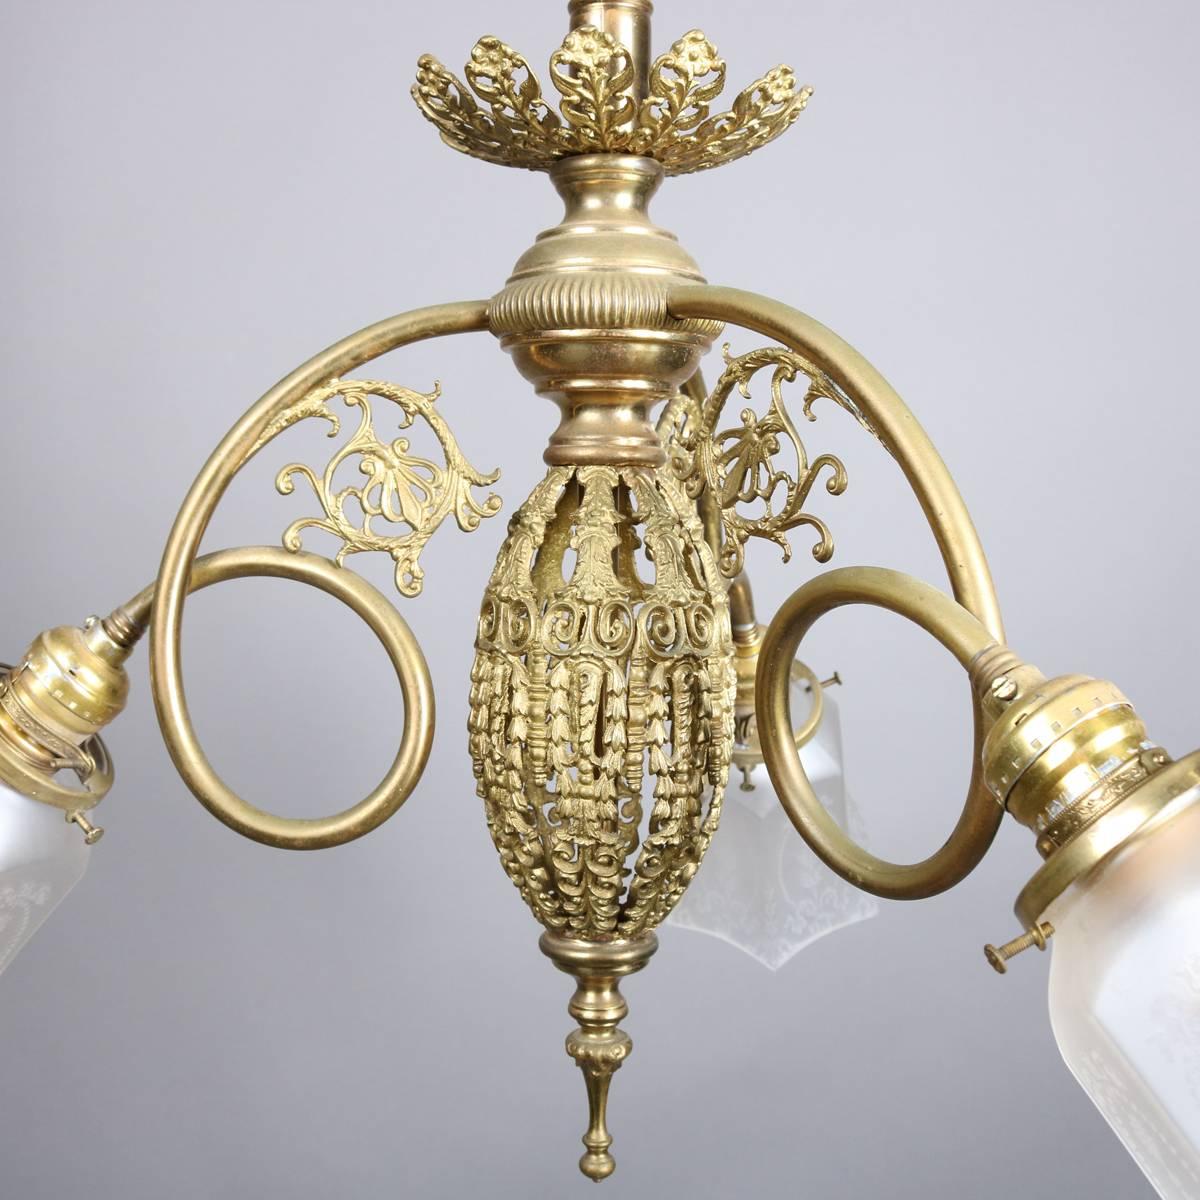 French Three-Light Foliate and Scroll Form Brass Chandelier with Etched Shades